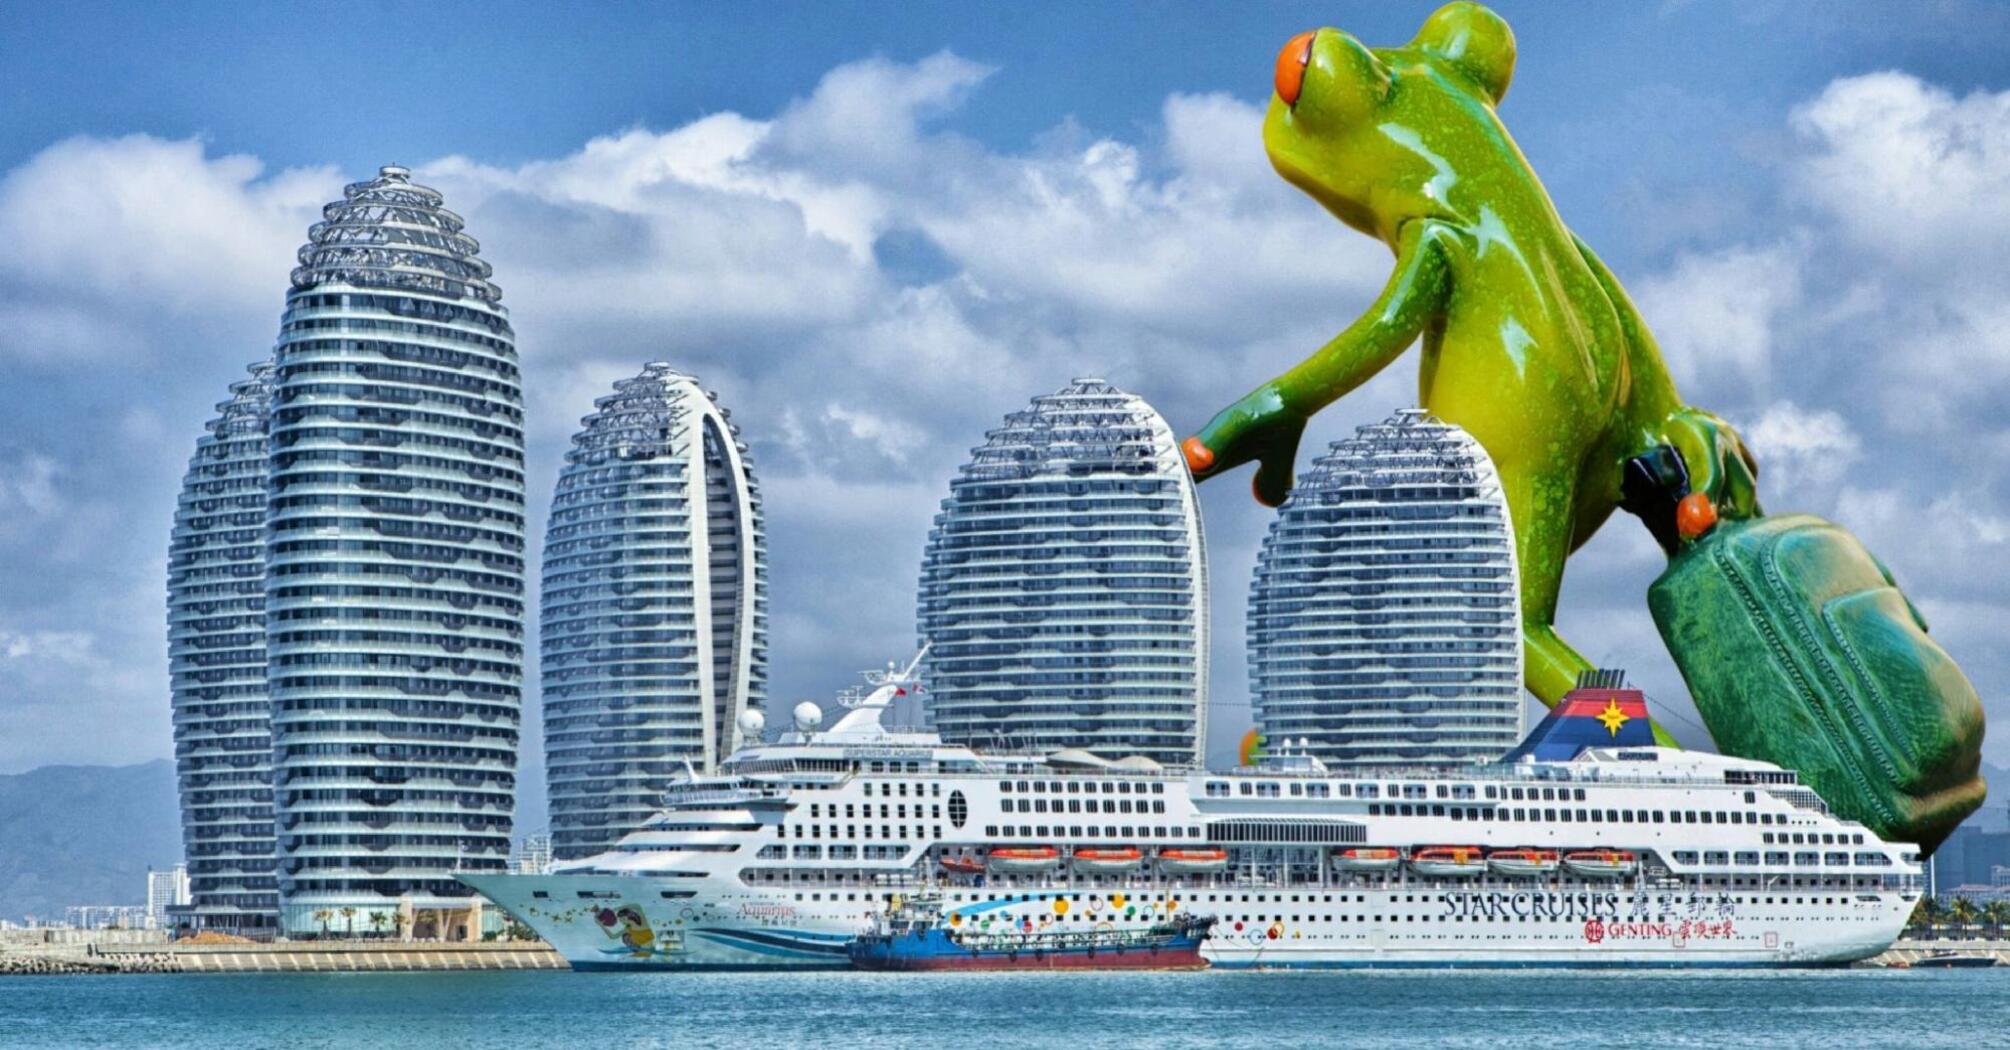 A large green frog sculpture with a briefcase against a backdrop of a city with several spiral-shaped high-rise buildings and a cruise liner at the dock